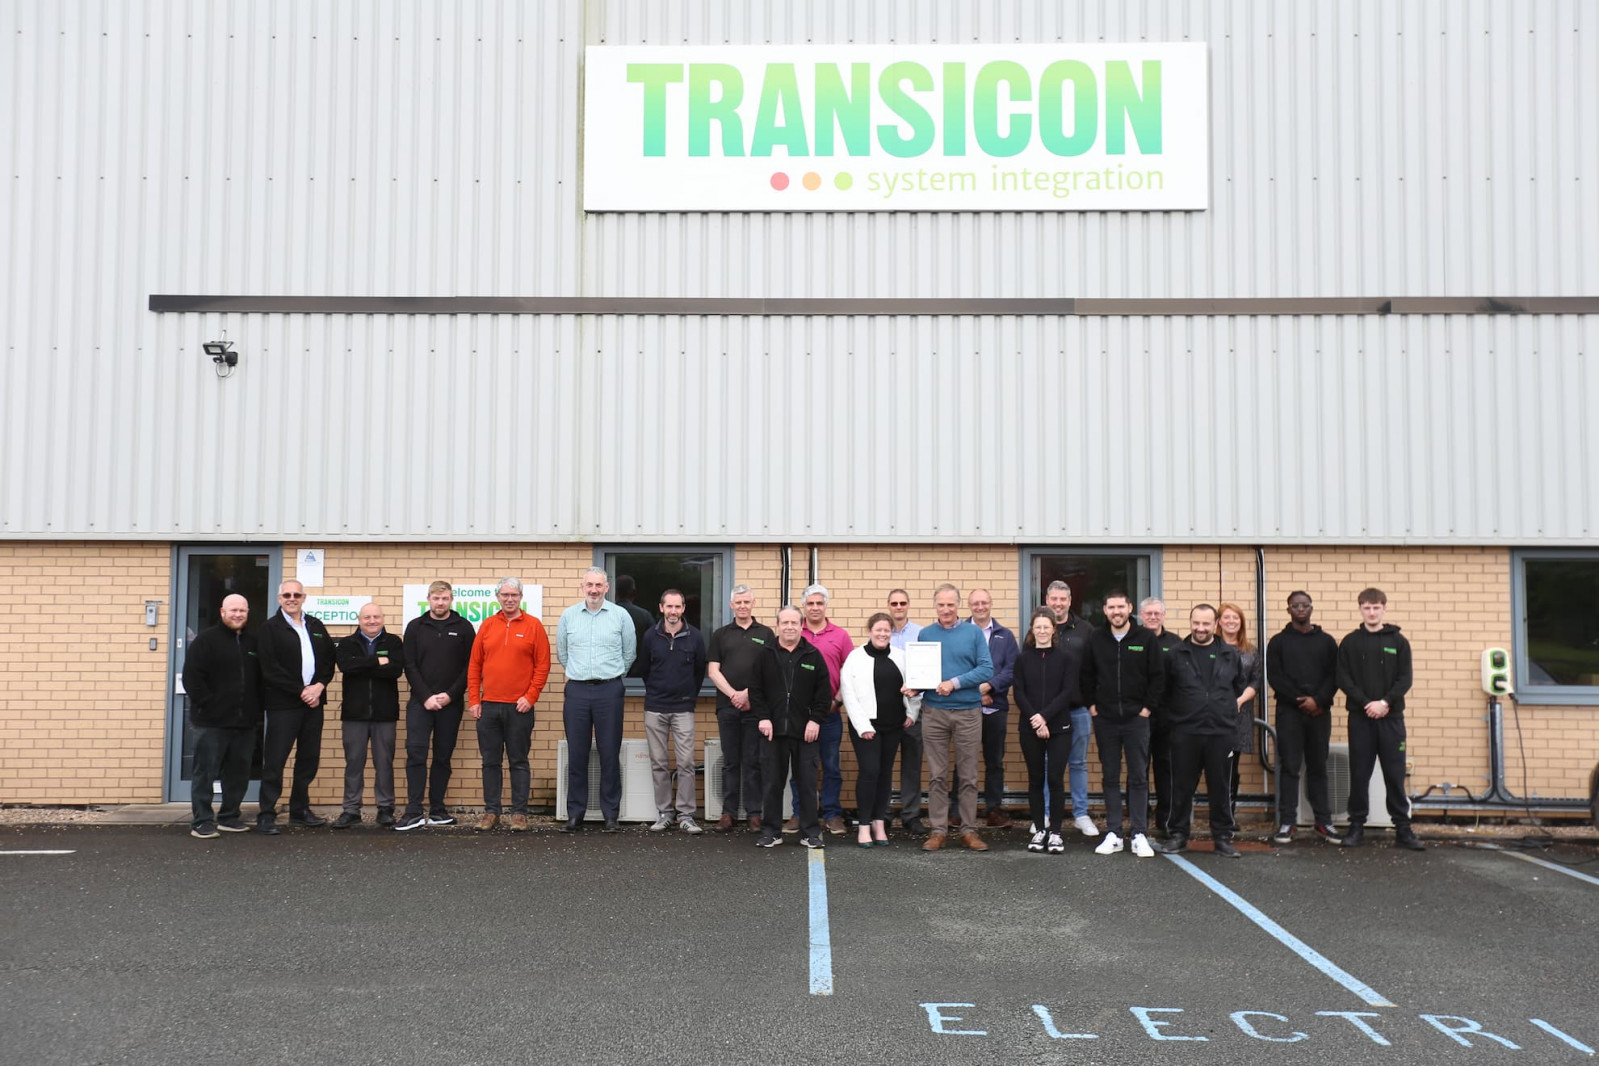 Transicon Achieves ISO 14001 Certification